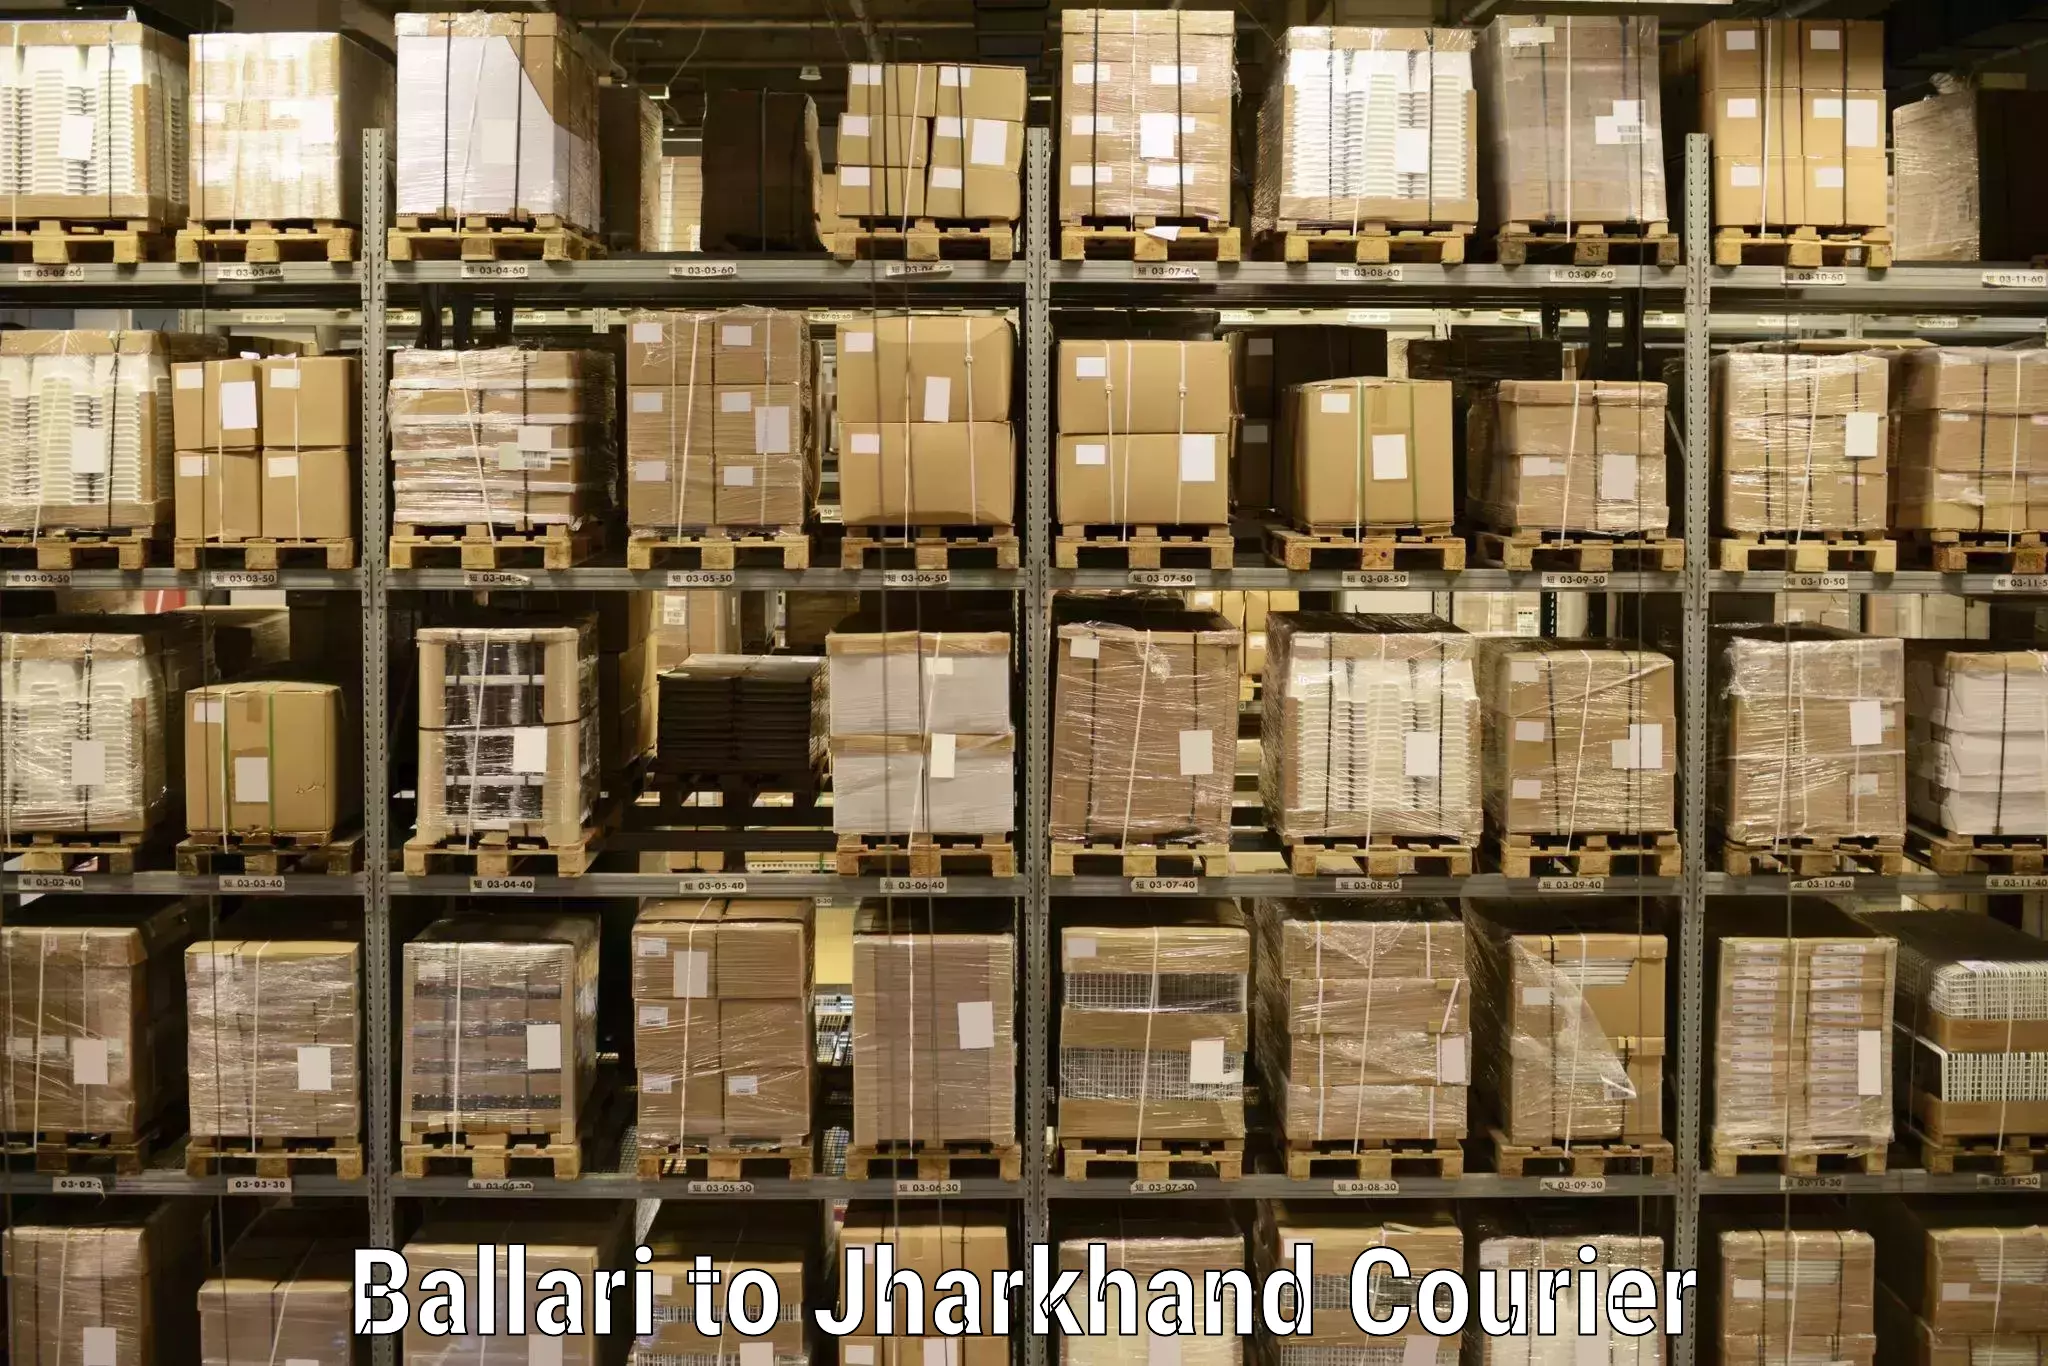 Supply chain delivery Ballari to Jamshedpur